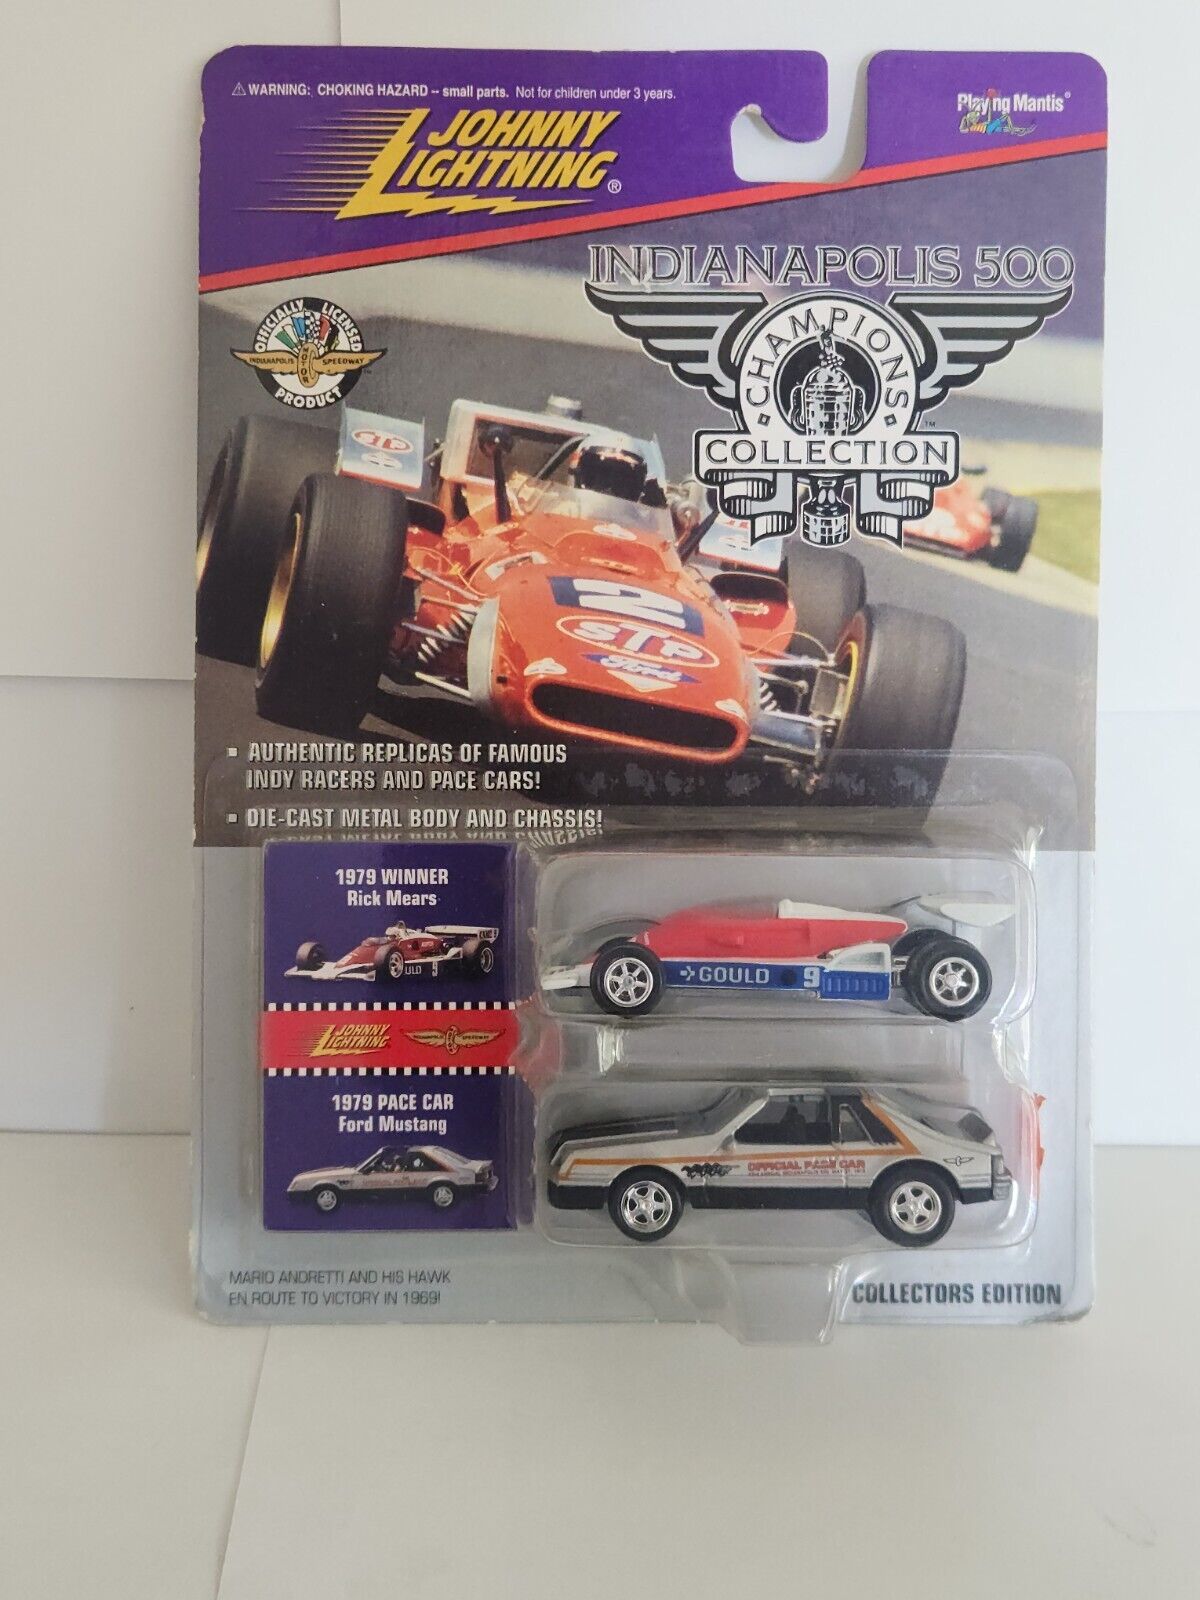 Johnny Lightning Indianapolis 500 1979 Winner Rick Mear 1979 Pace Car Ford L26